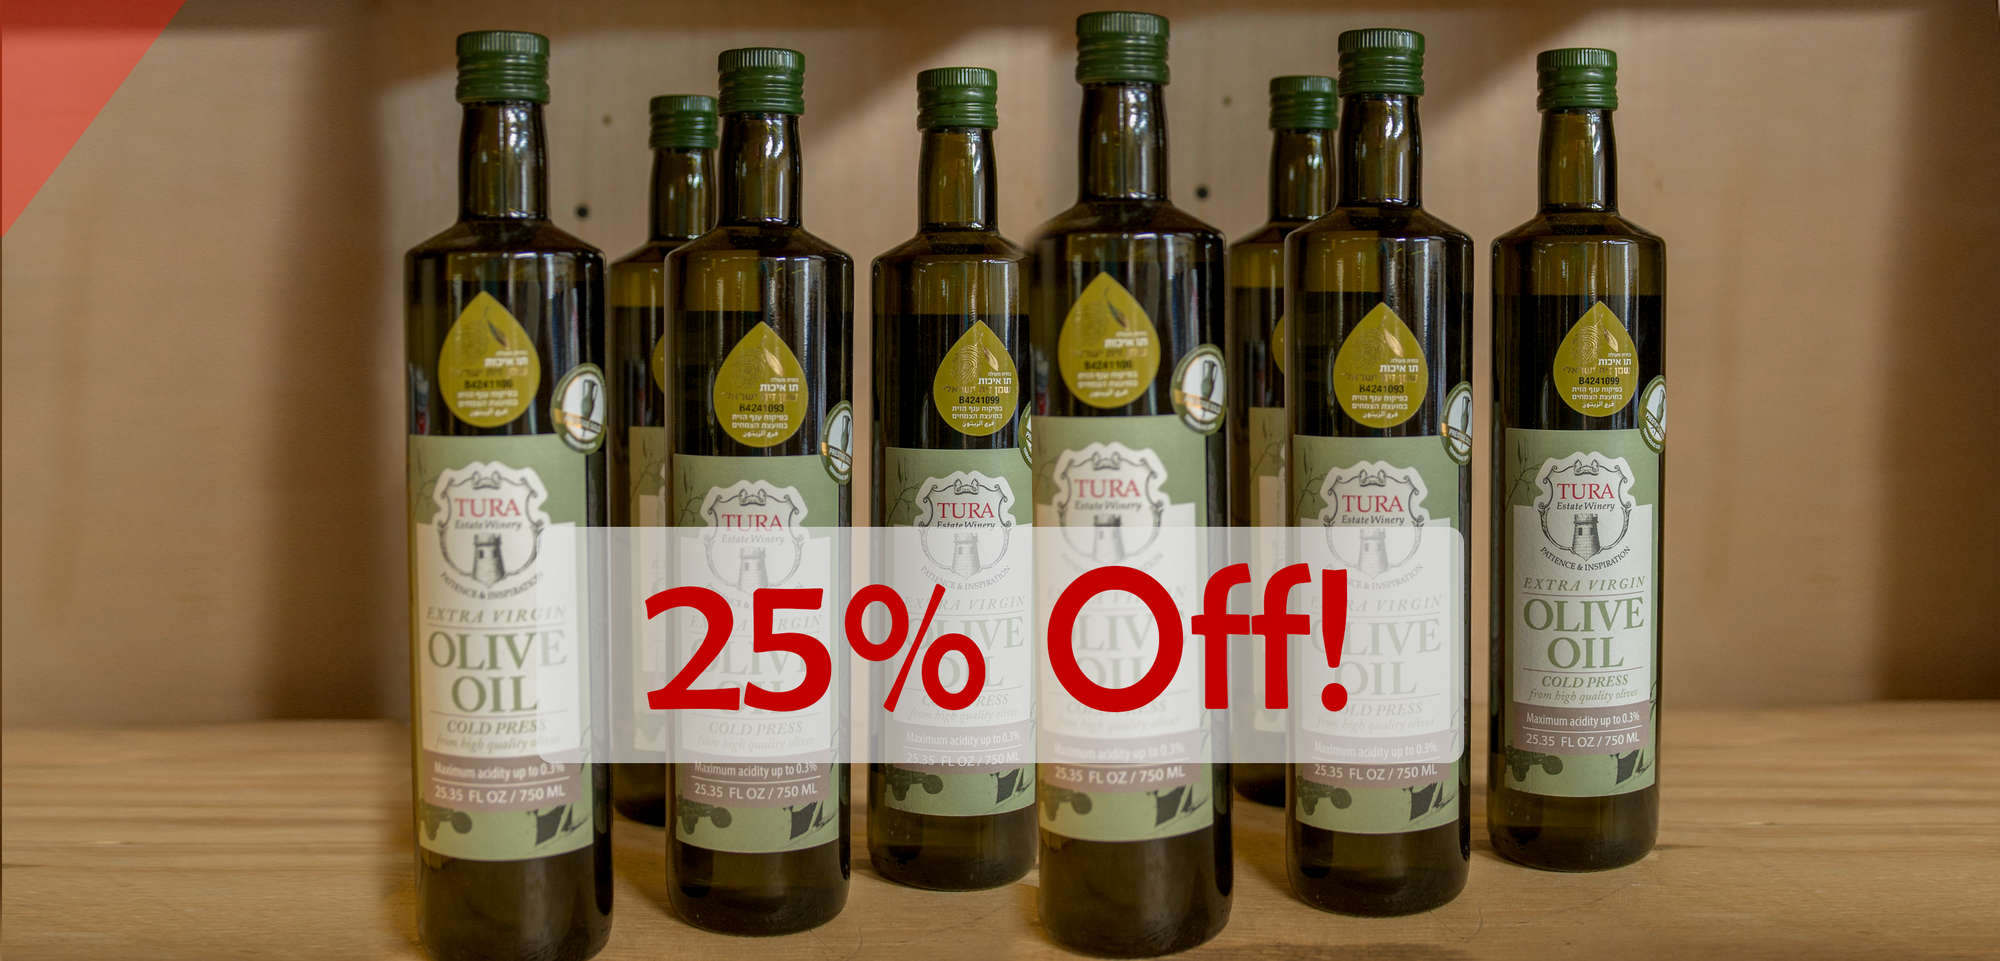 Passover Sale! Olive Oil 25% Off. Rejoice this season with products from Judea and Samaria